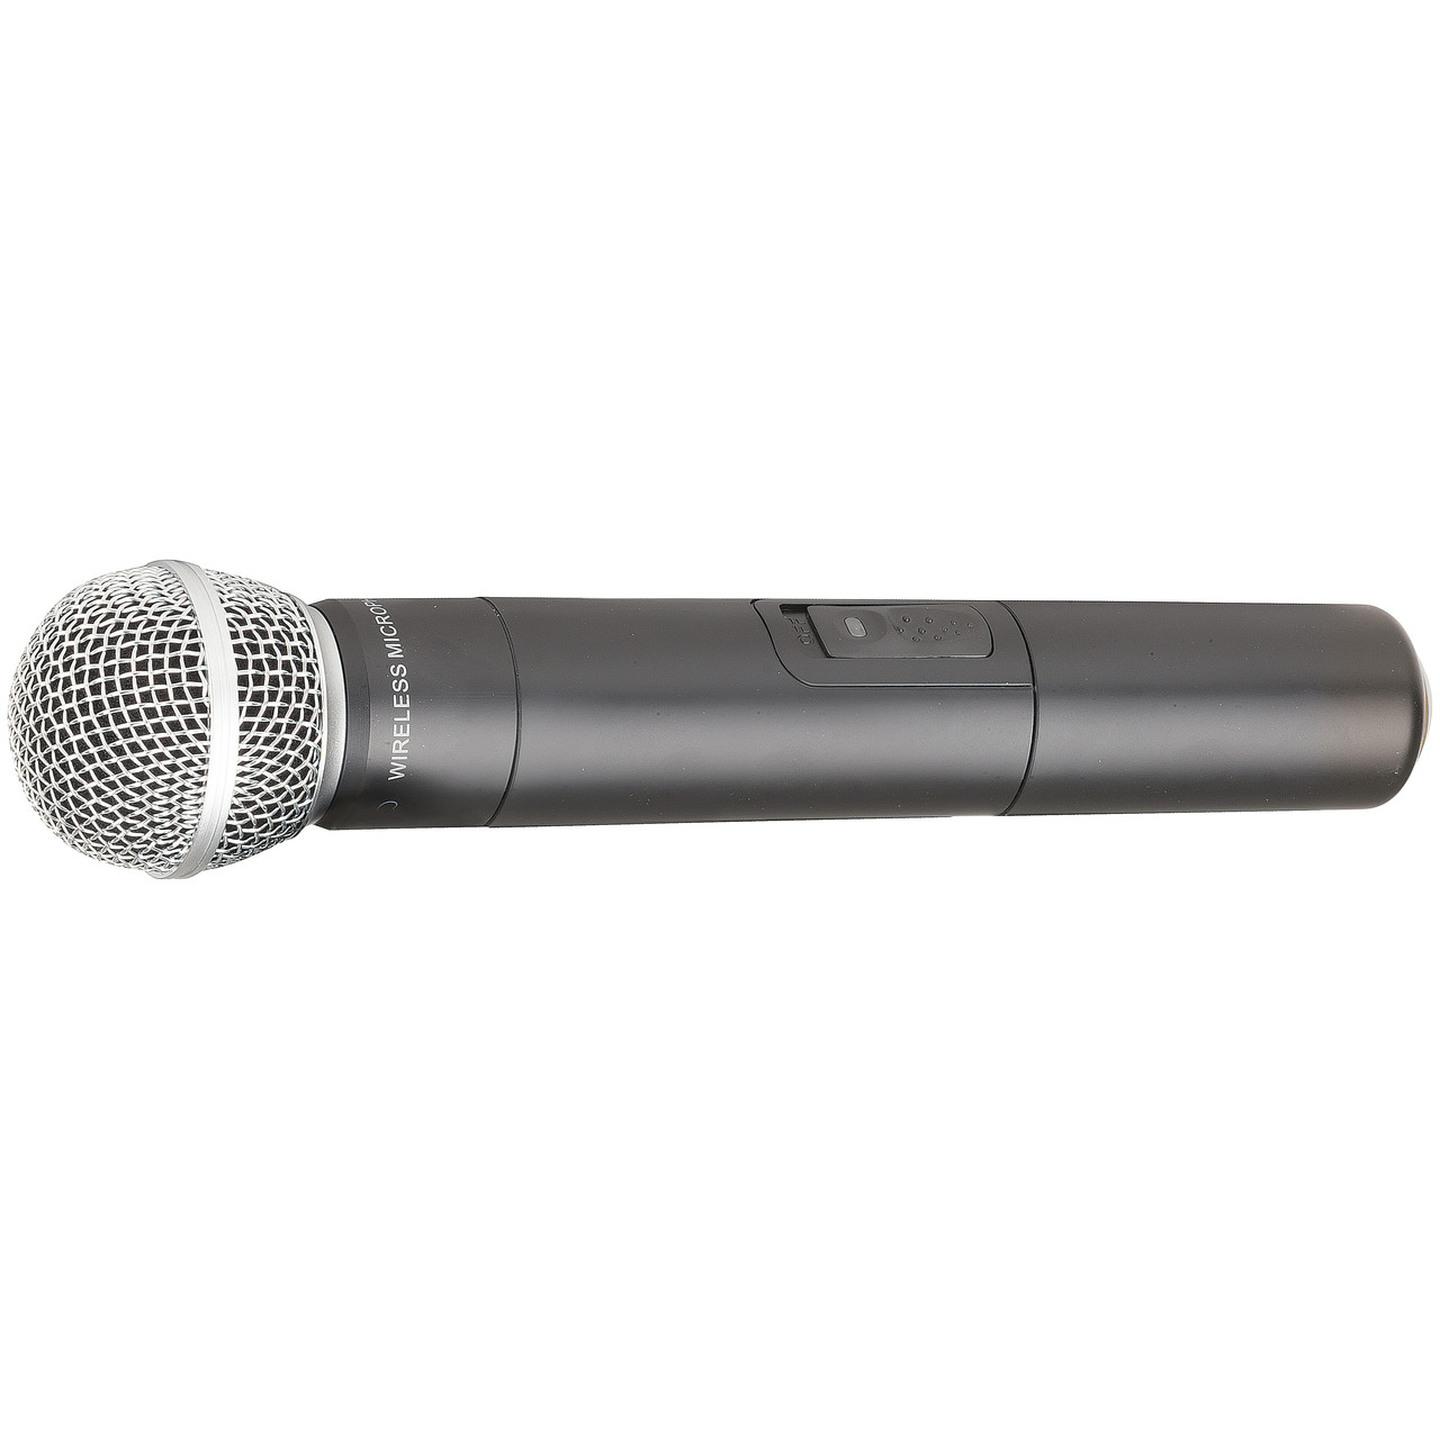 Digitech Channel A Handheld Microphone for AM4132 or AM4114